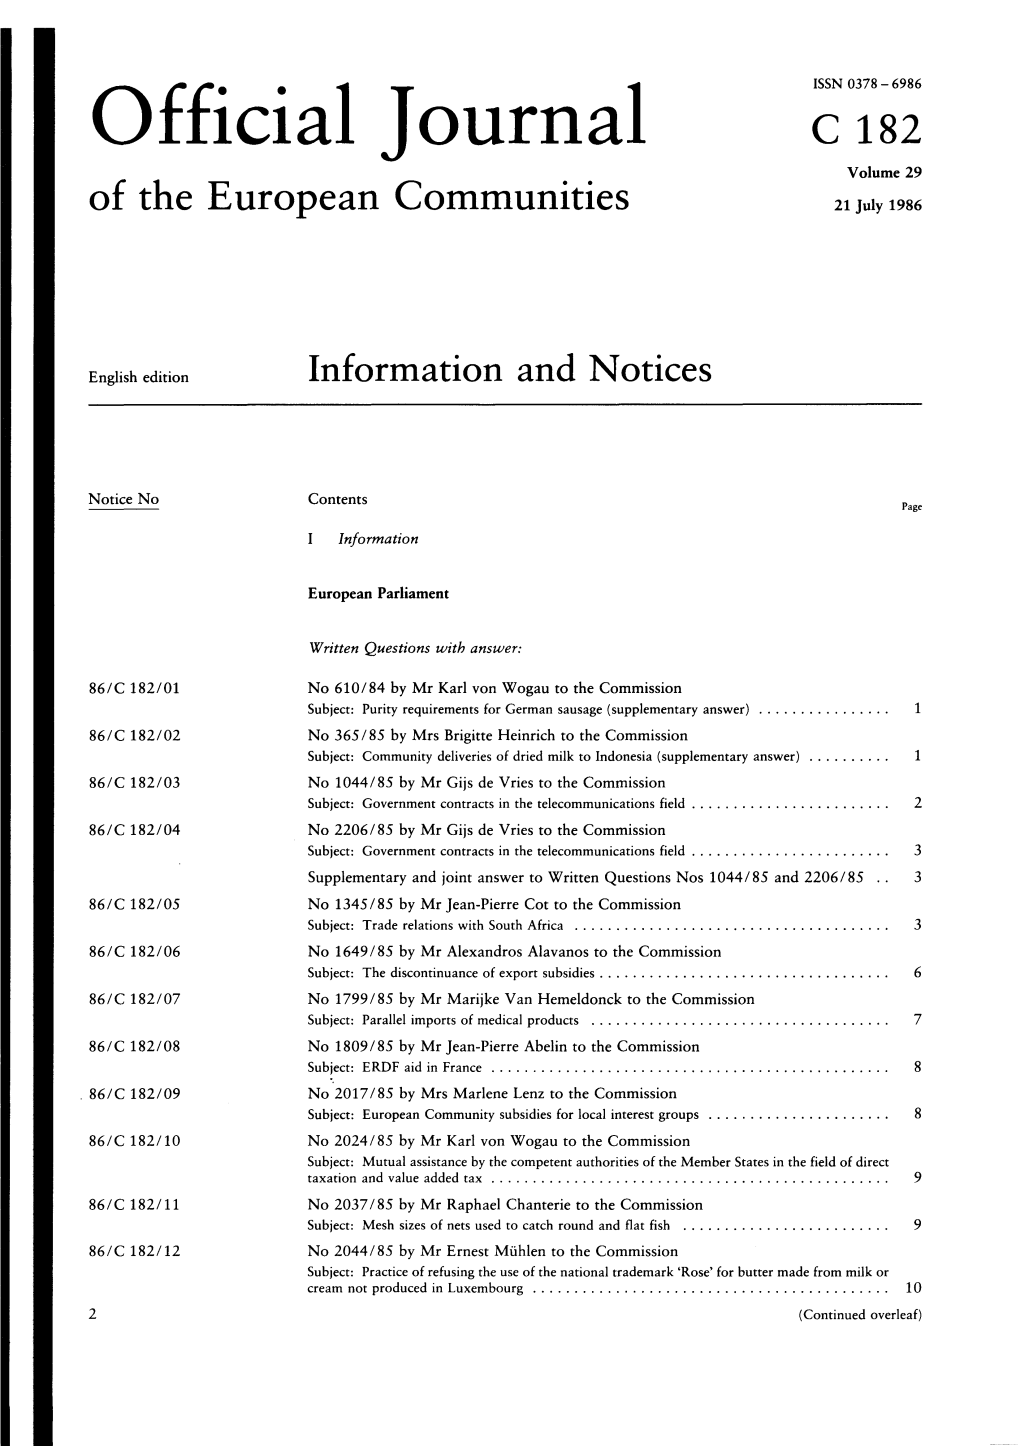 Official Journal C 182 Volume 29 of the European Communities 21 July 1986